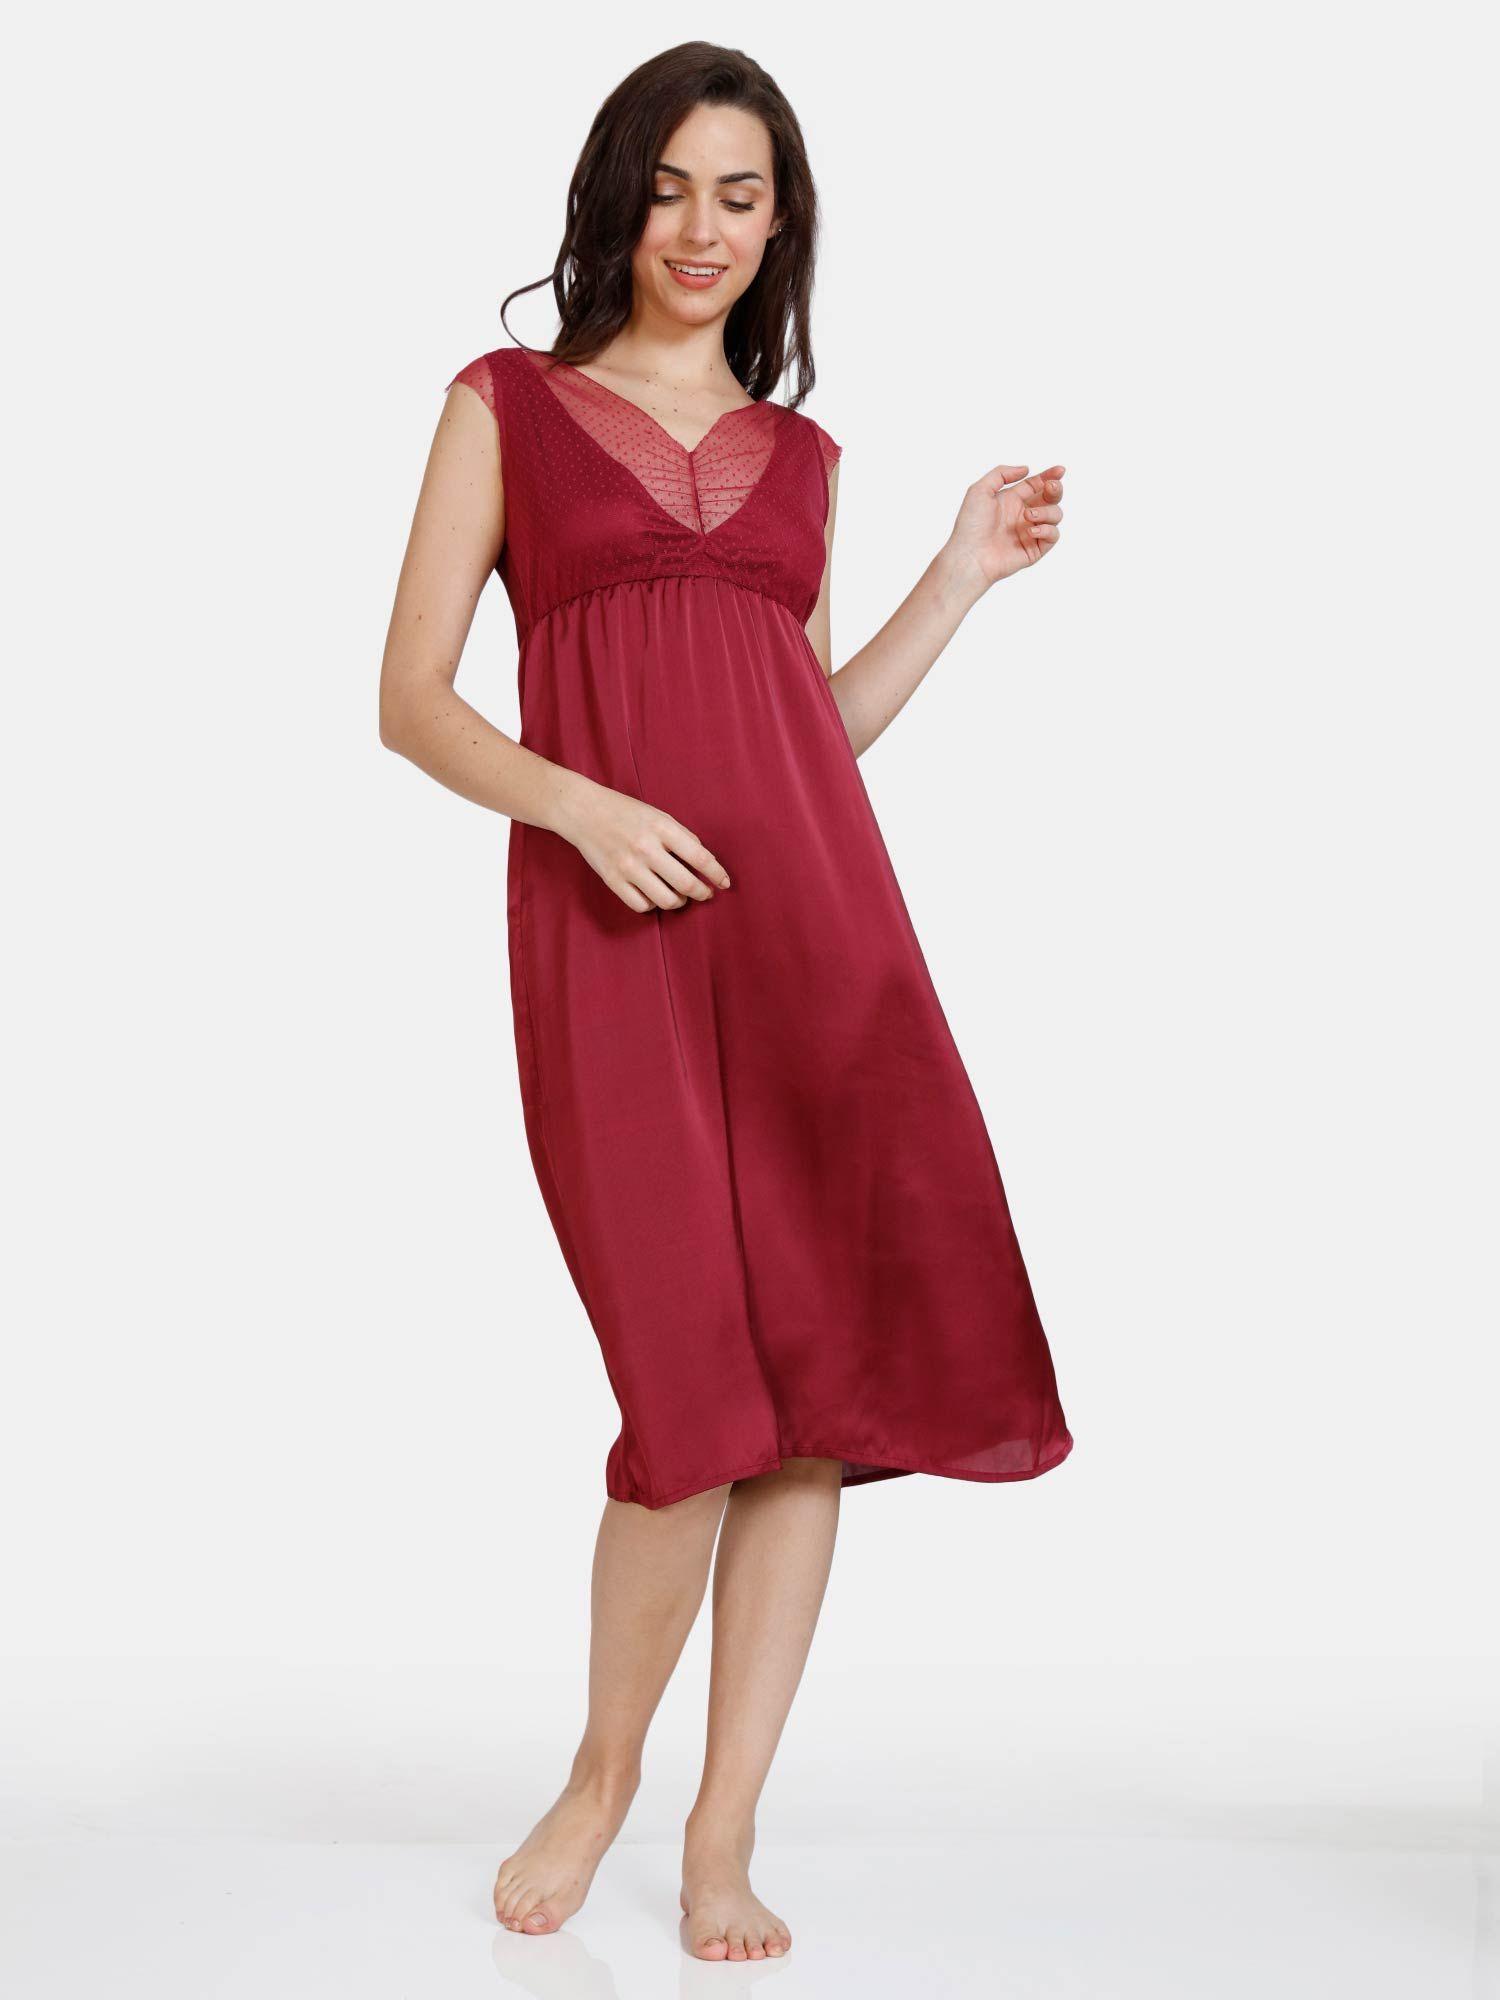 paradise garden woven mid length nightdress red